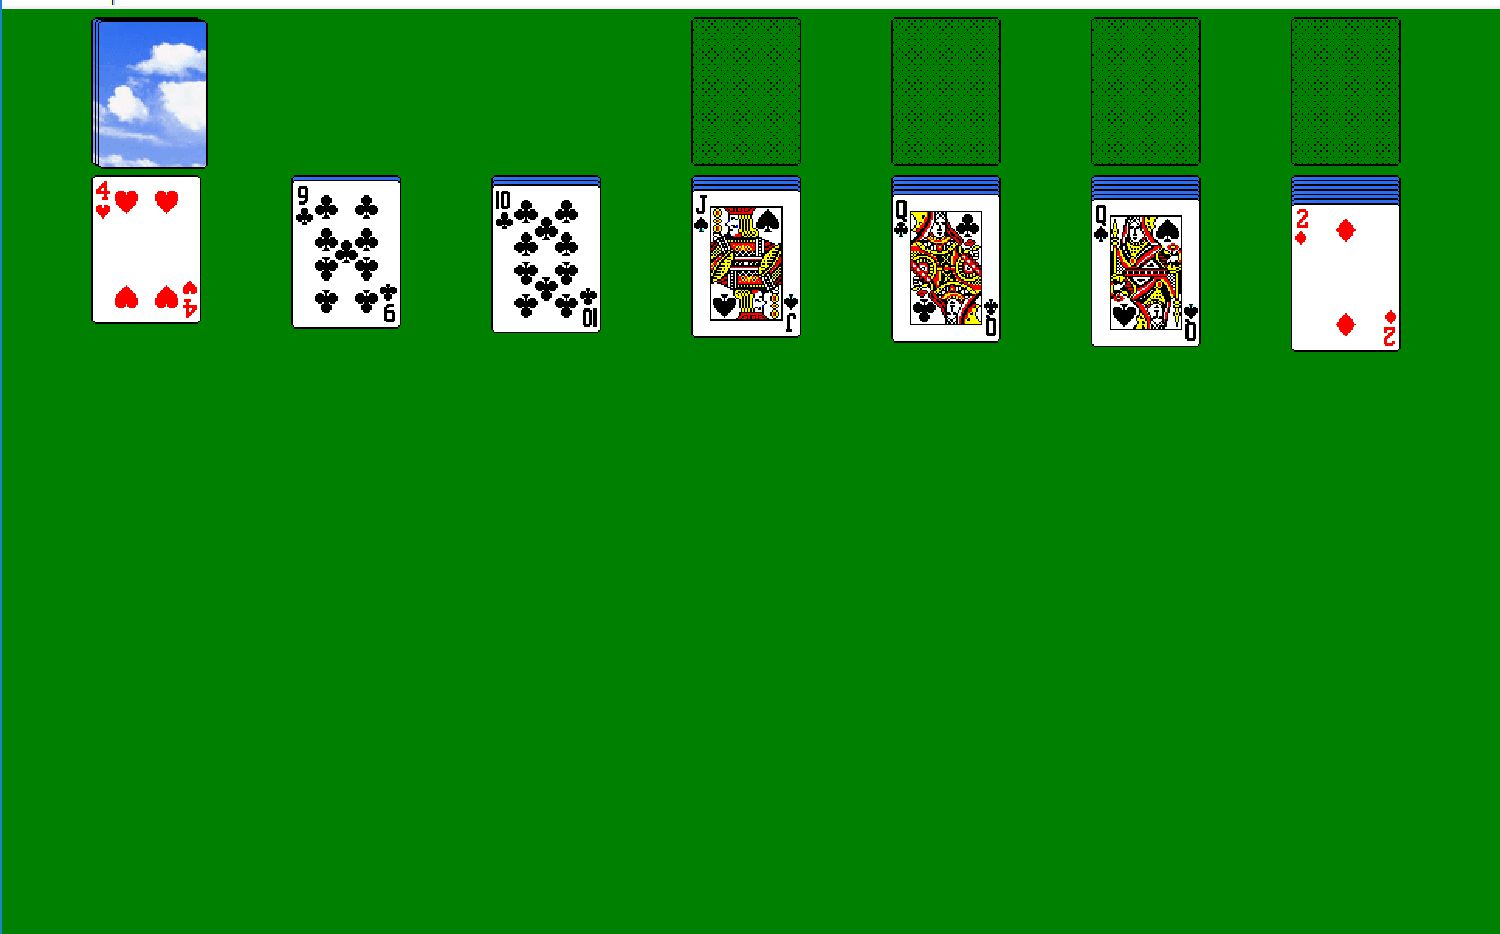 How To Win Spider Solitaire